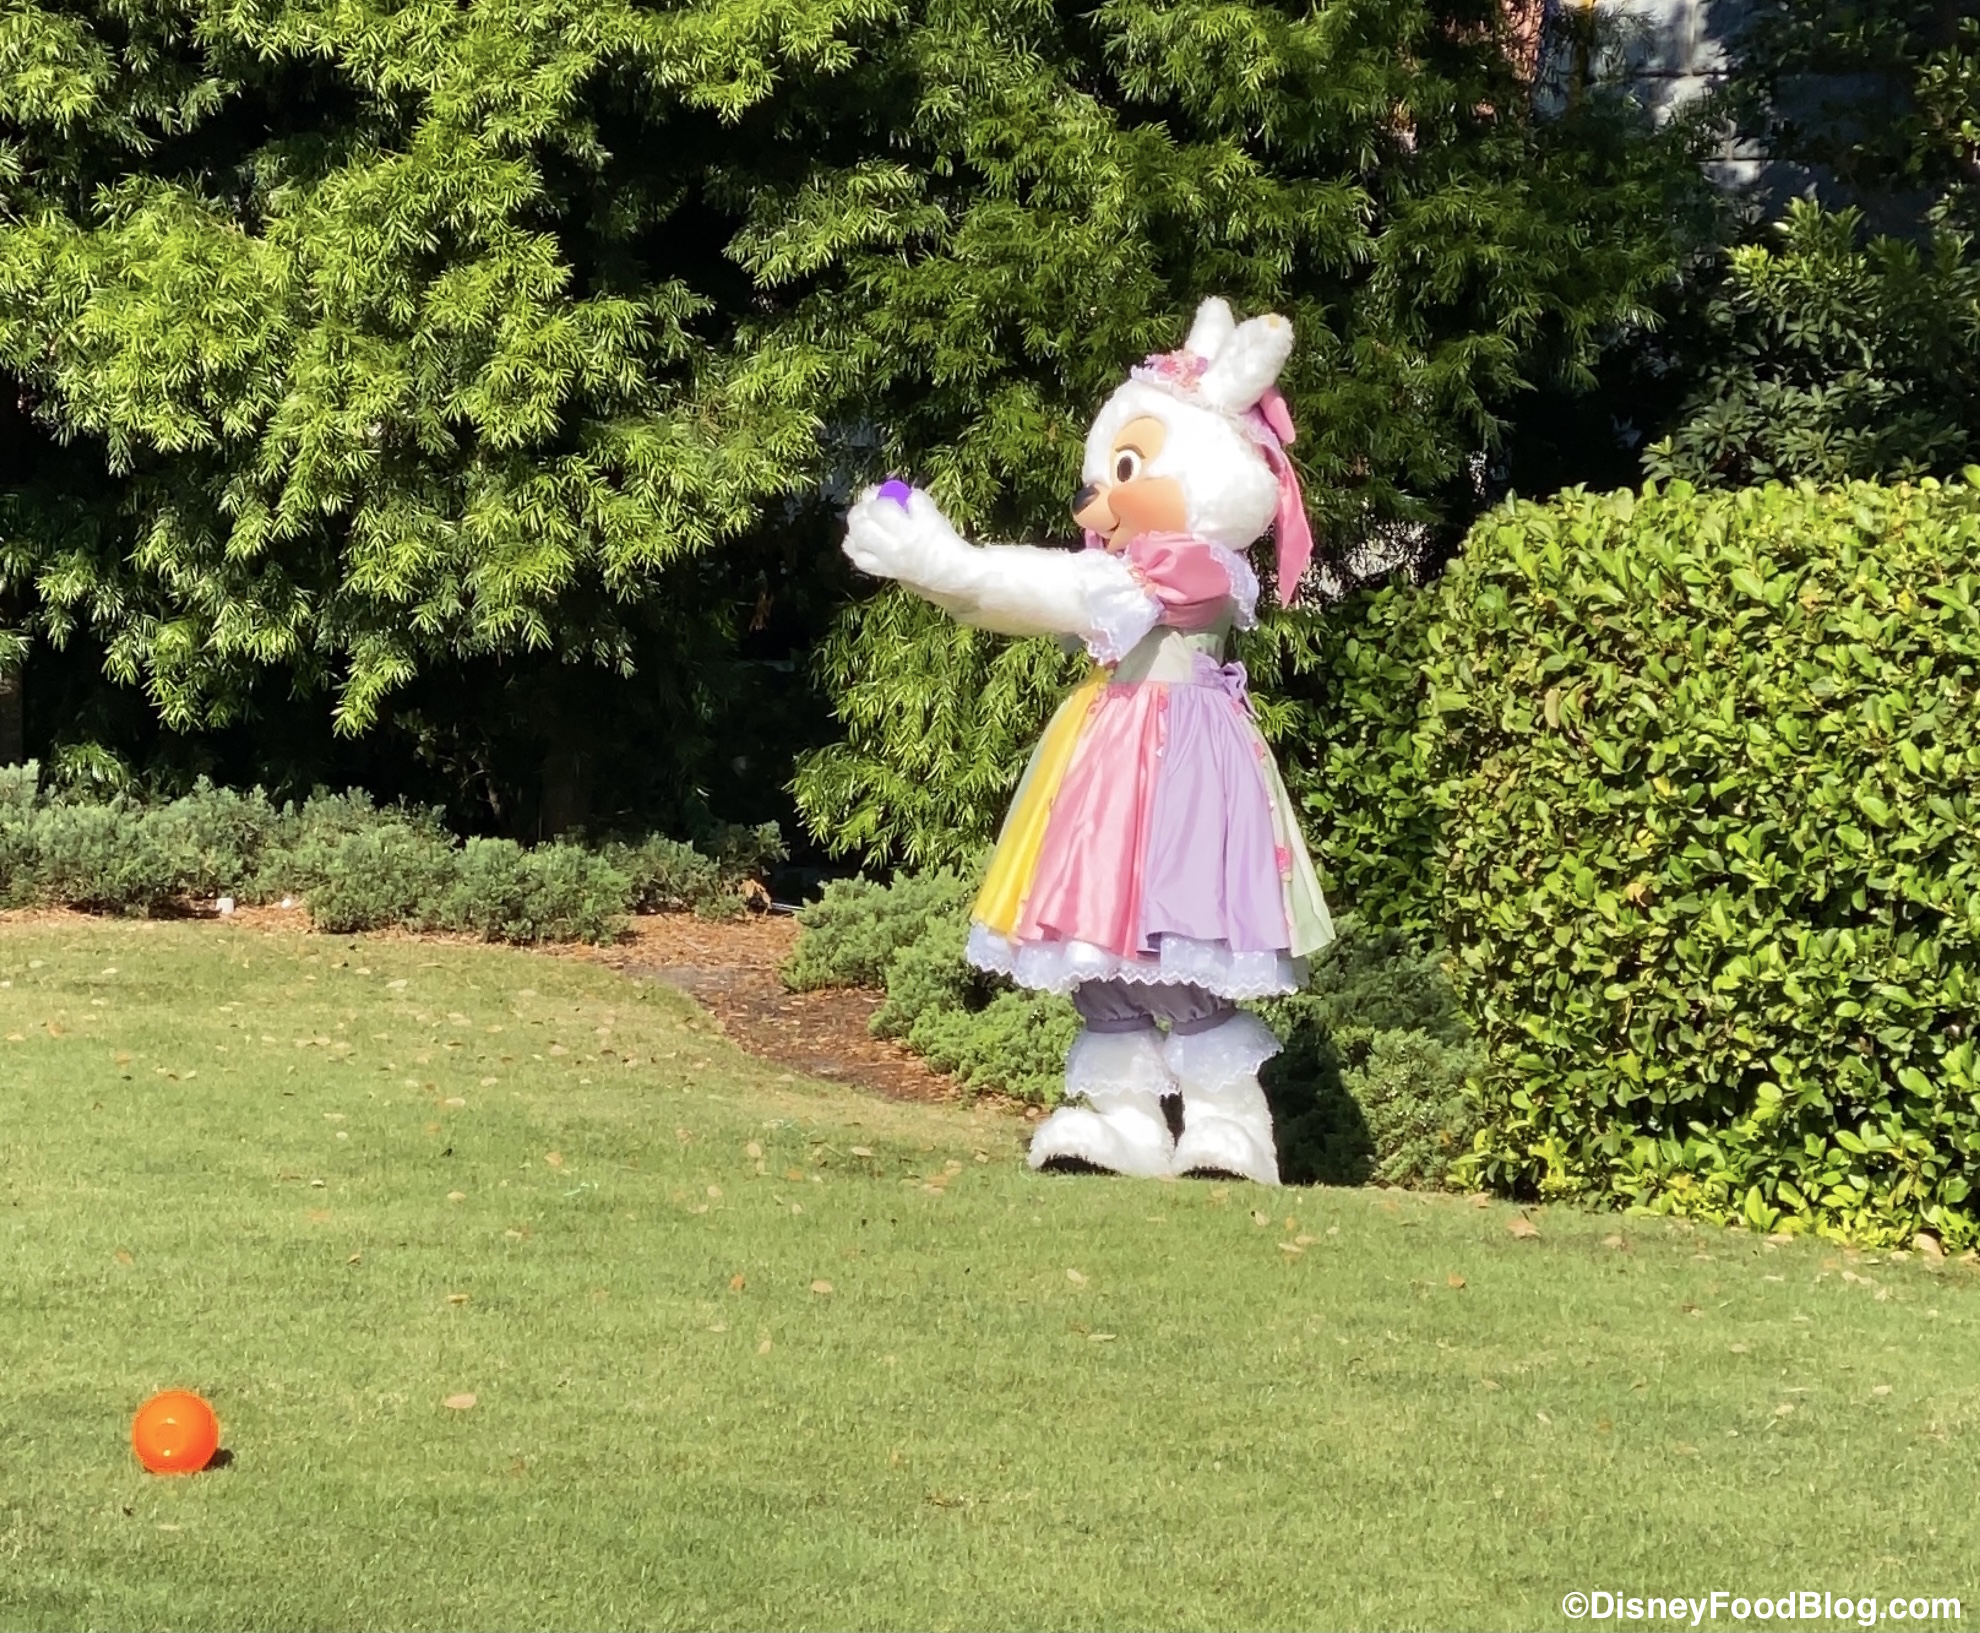 PHOTOS: Mr. & Mrs. Easter Bunny Stopped By Disney World for an Egg Hunt!